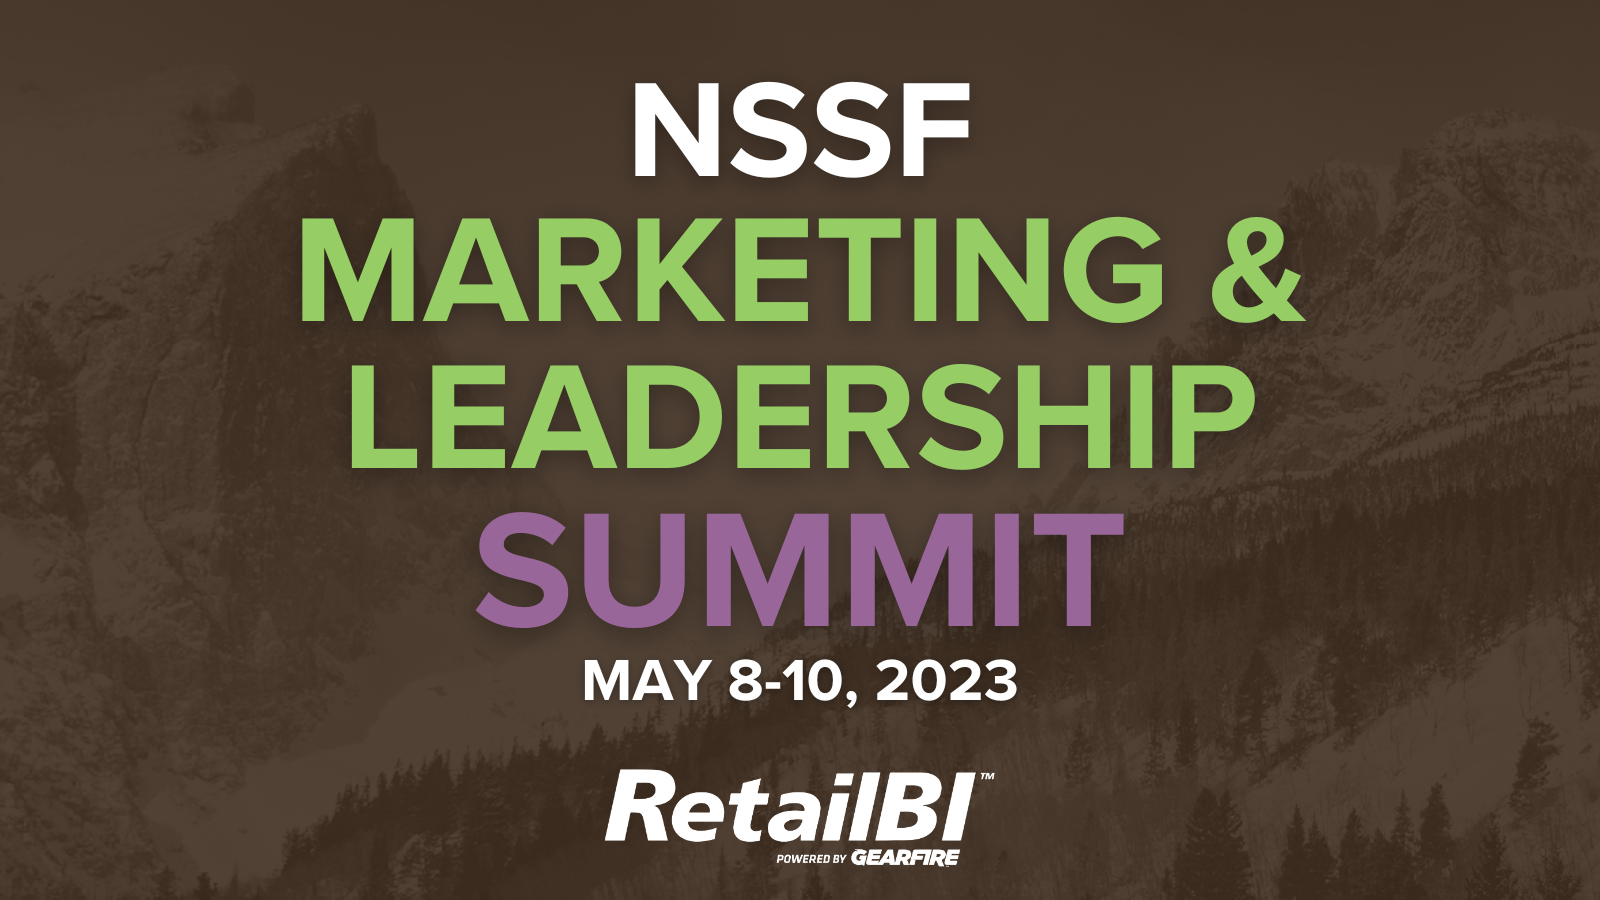 RetailBI Powered By Gearfire Announces Sponsorship Role at 2023 NSSF Marketing and Leadership Summit featured img